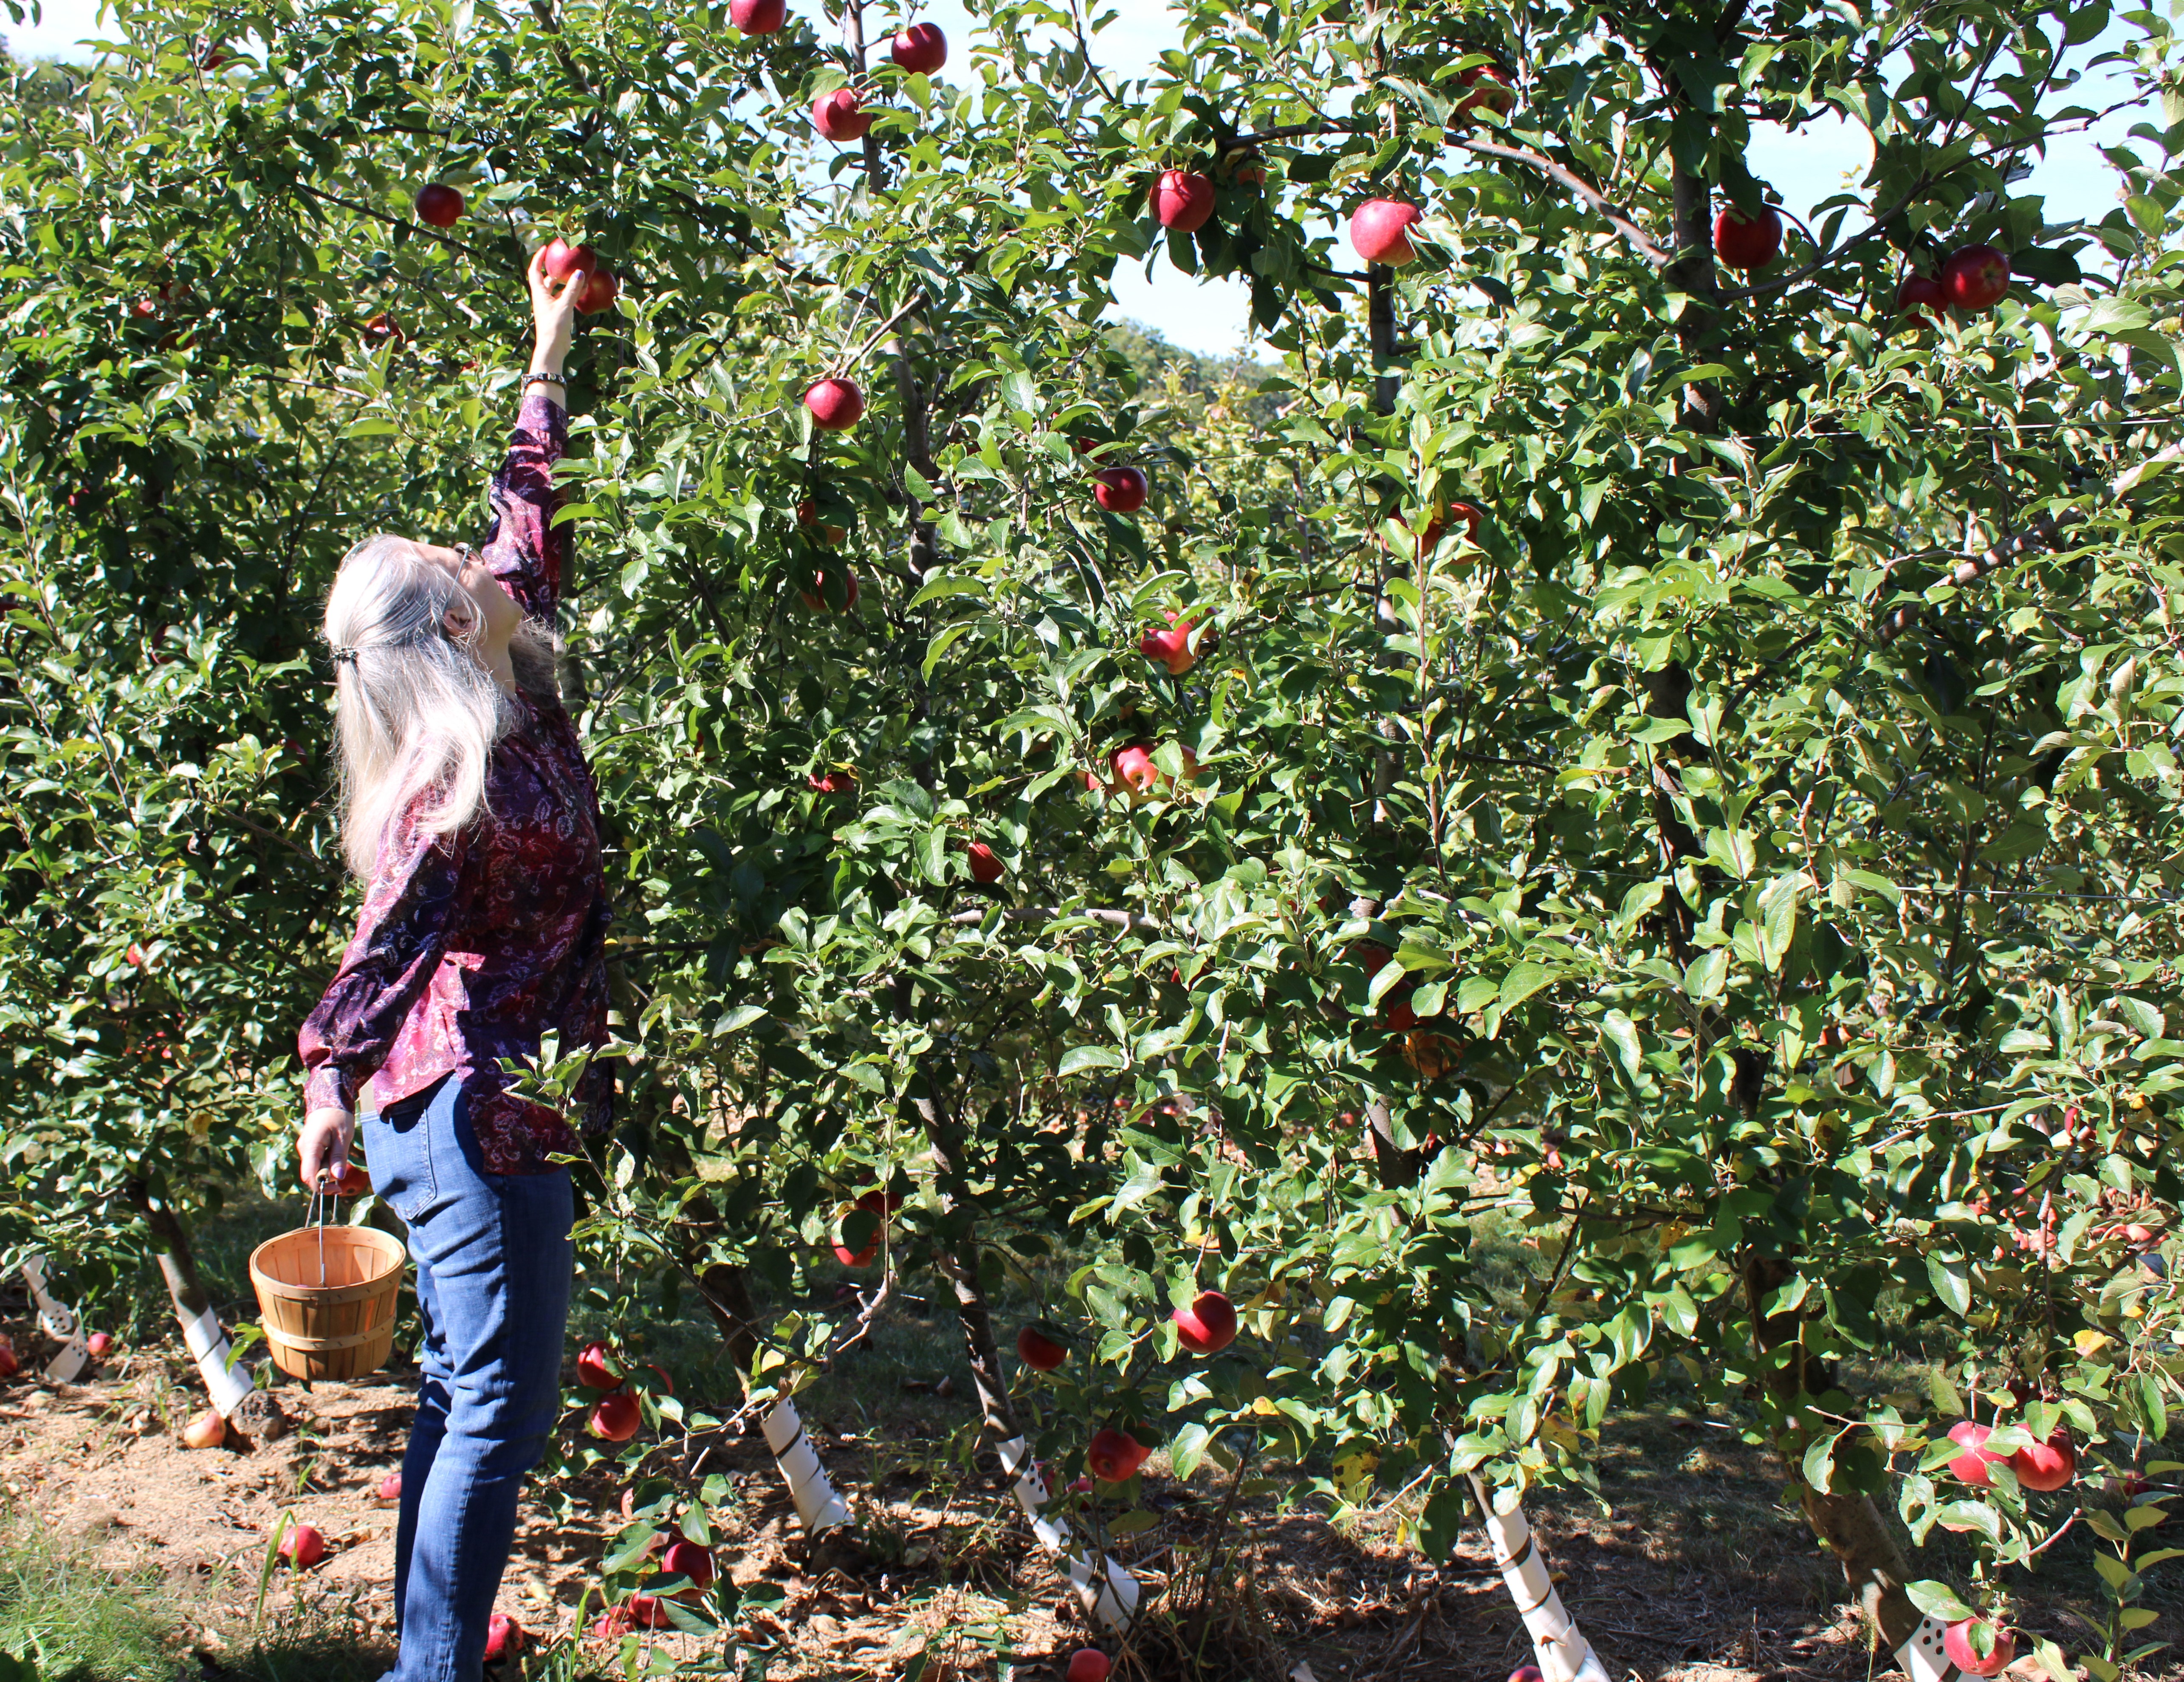 Renee is reaching new heights to find the perfect apple